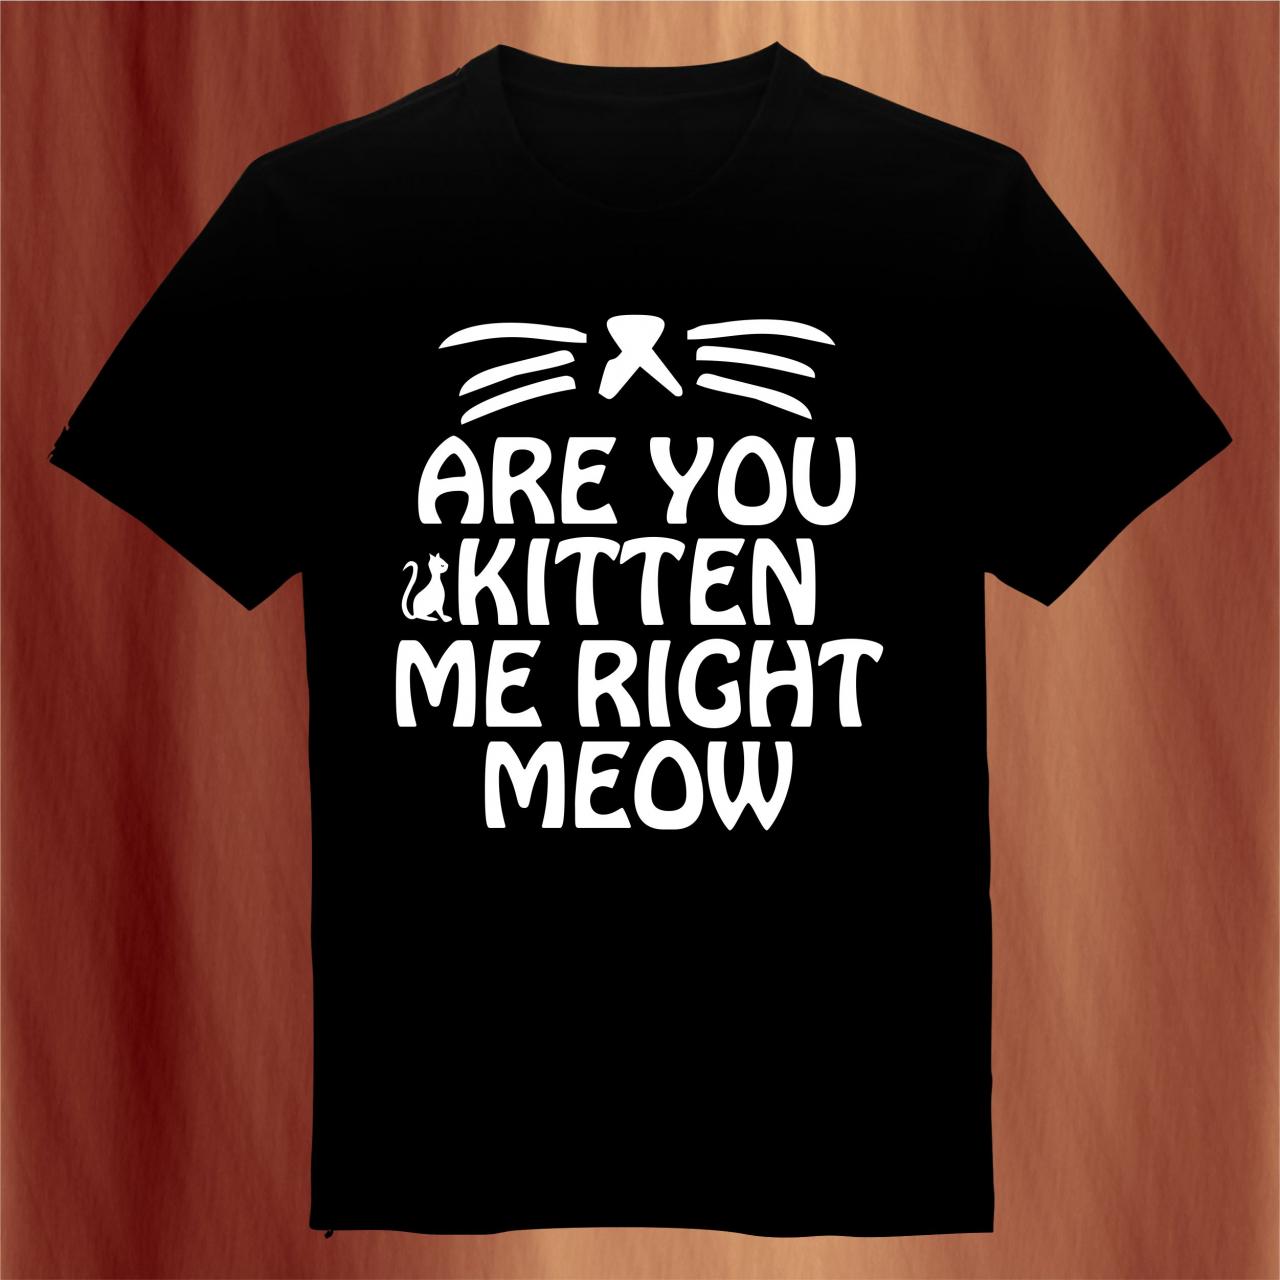 Are You Kitten Me Right Meow T-shirt Mens And Womens Cotton Screenprint Size S - 3xl